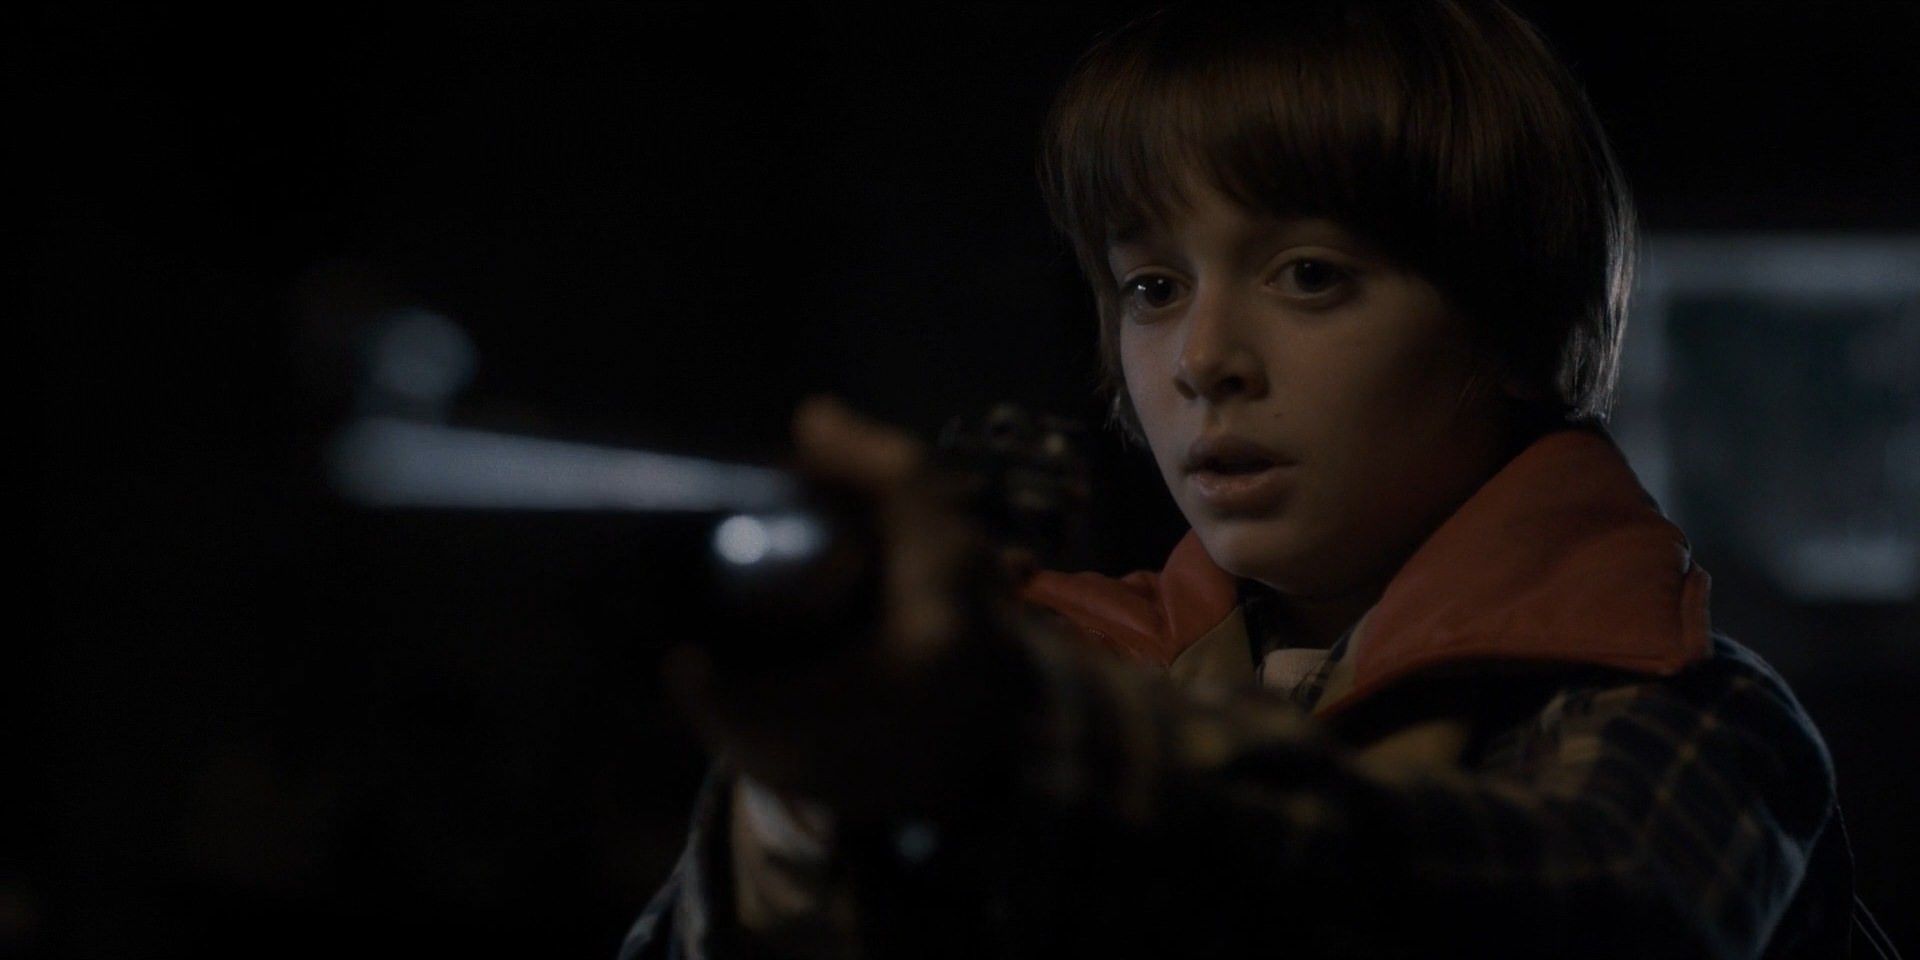 Noah Schnapp as Will Byers with shotgun in Stranger Things